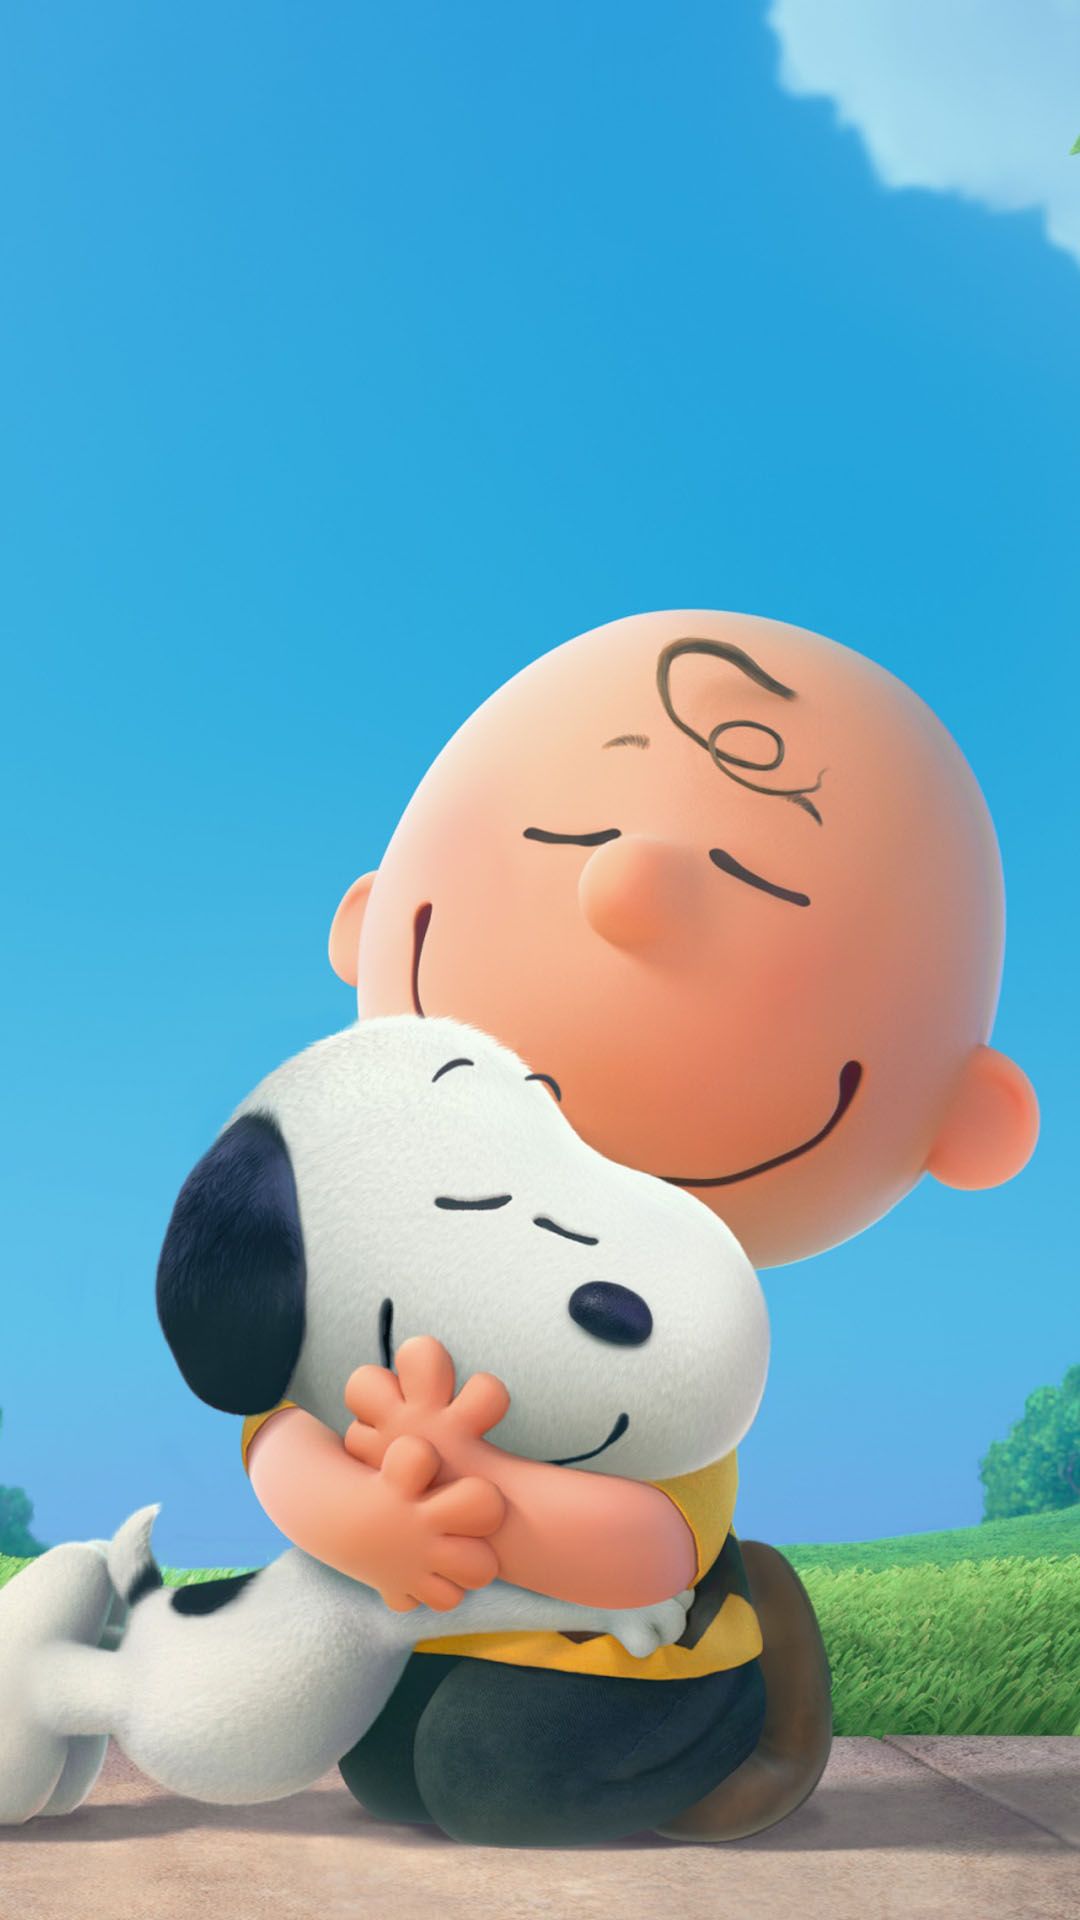 Peanuts Snoopy iPhone 6 / 6 Plus and iPhone 5/4 Wallpapers